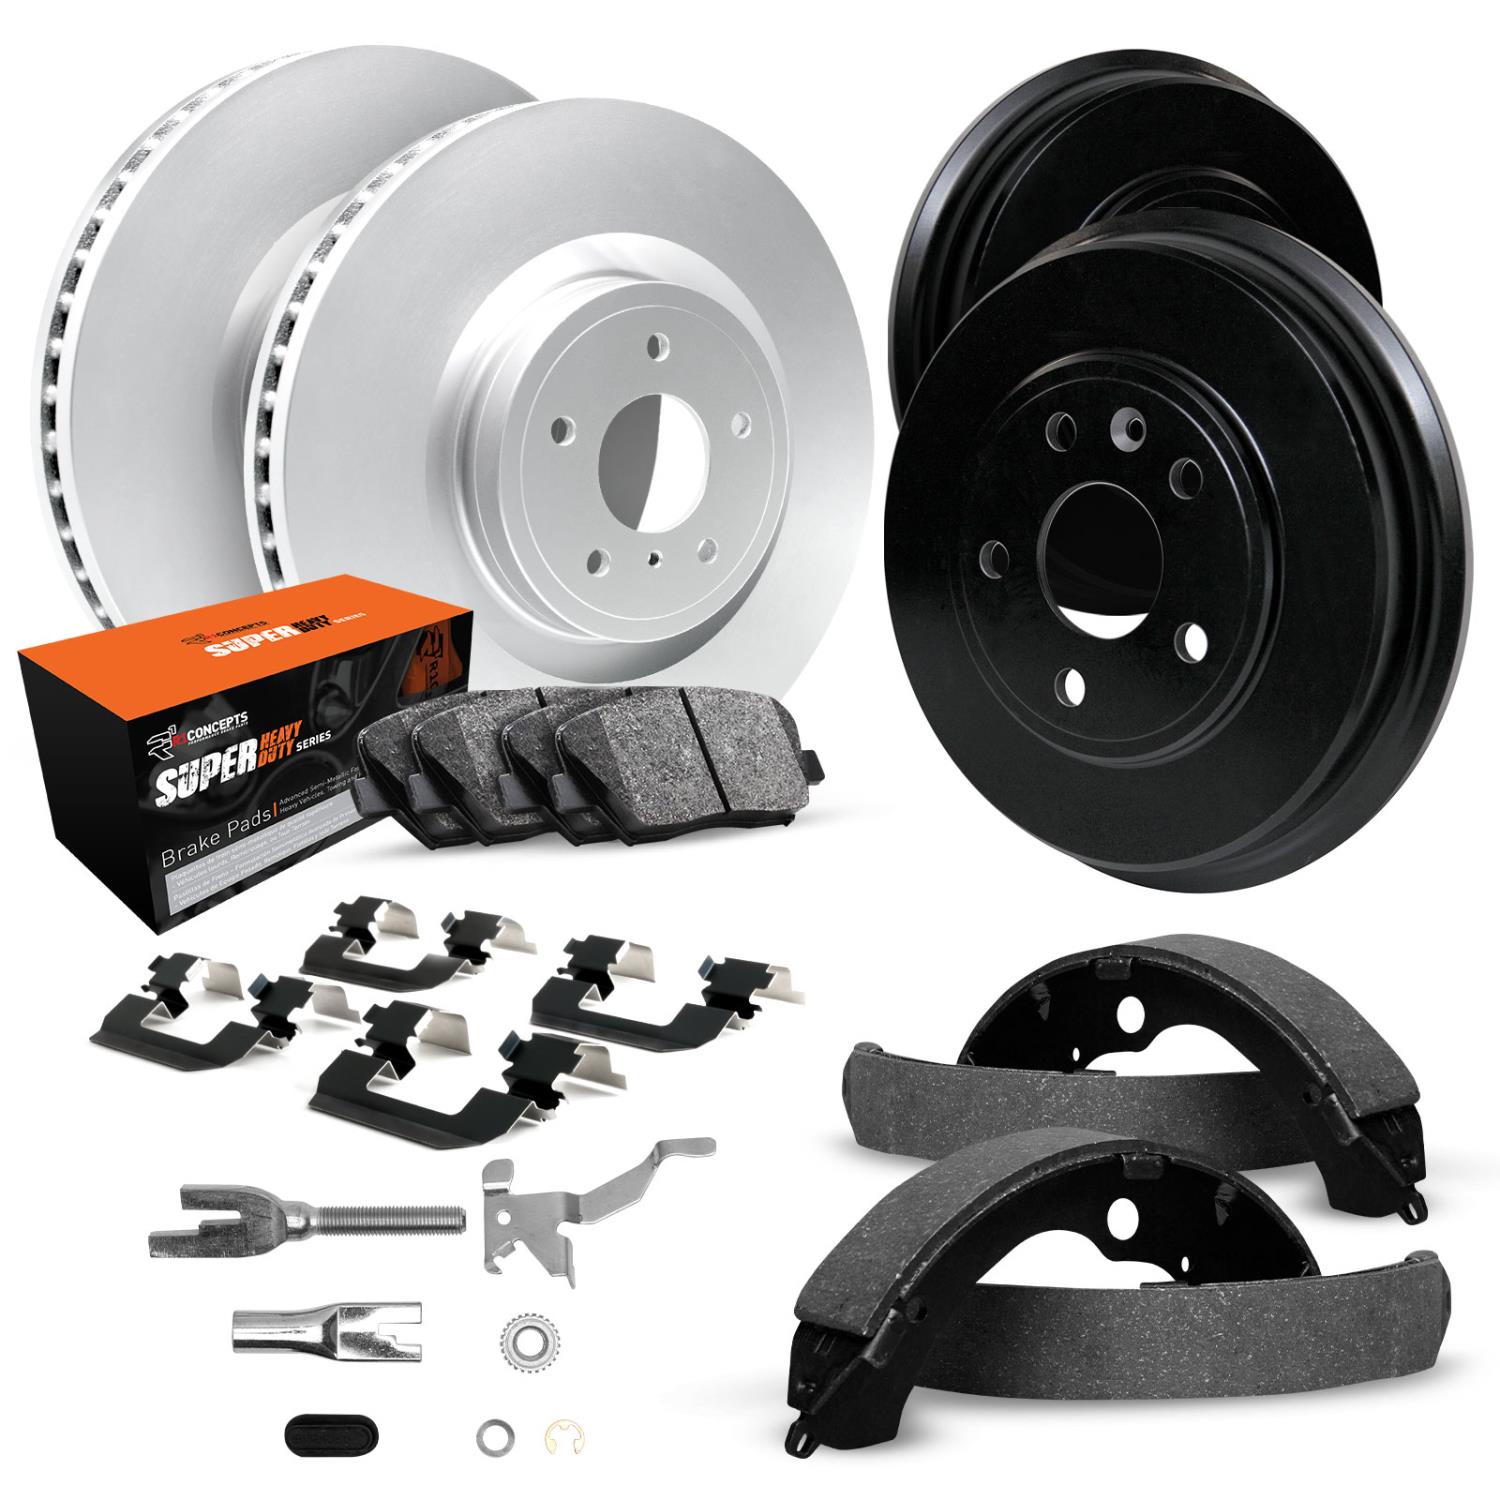 GEO-Carbon Brake Rotor & Drum Set w/Super-Duty Pads, Shoes, Hardware/Adjusters, 1999-2003 Ford/Lincoln/Mercury/Mazda